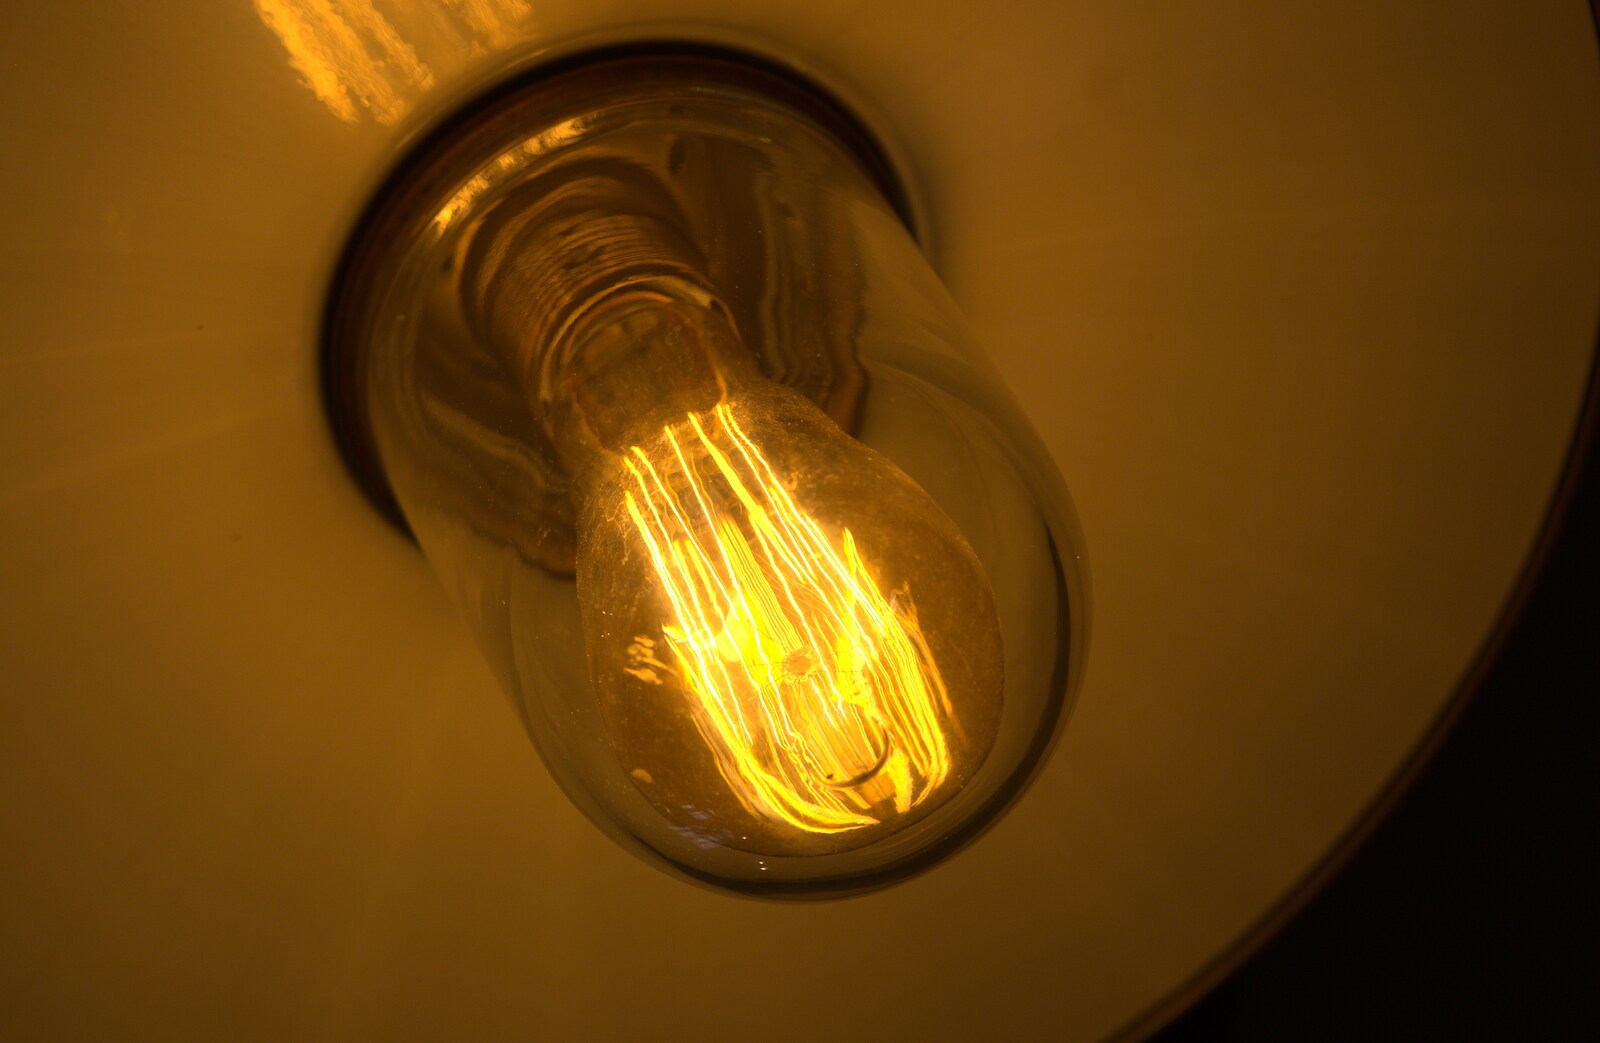 Funky lightbulb from Camping at Silver Strand, Wicklow, County Wicklow, Ireland - 7th August 2014